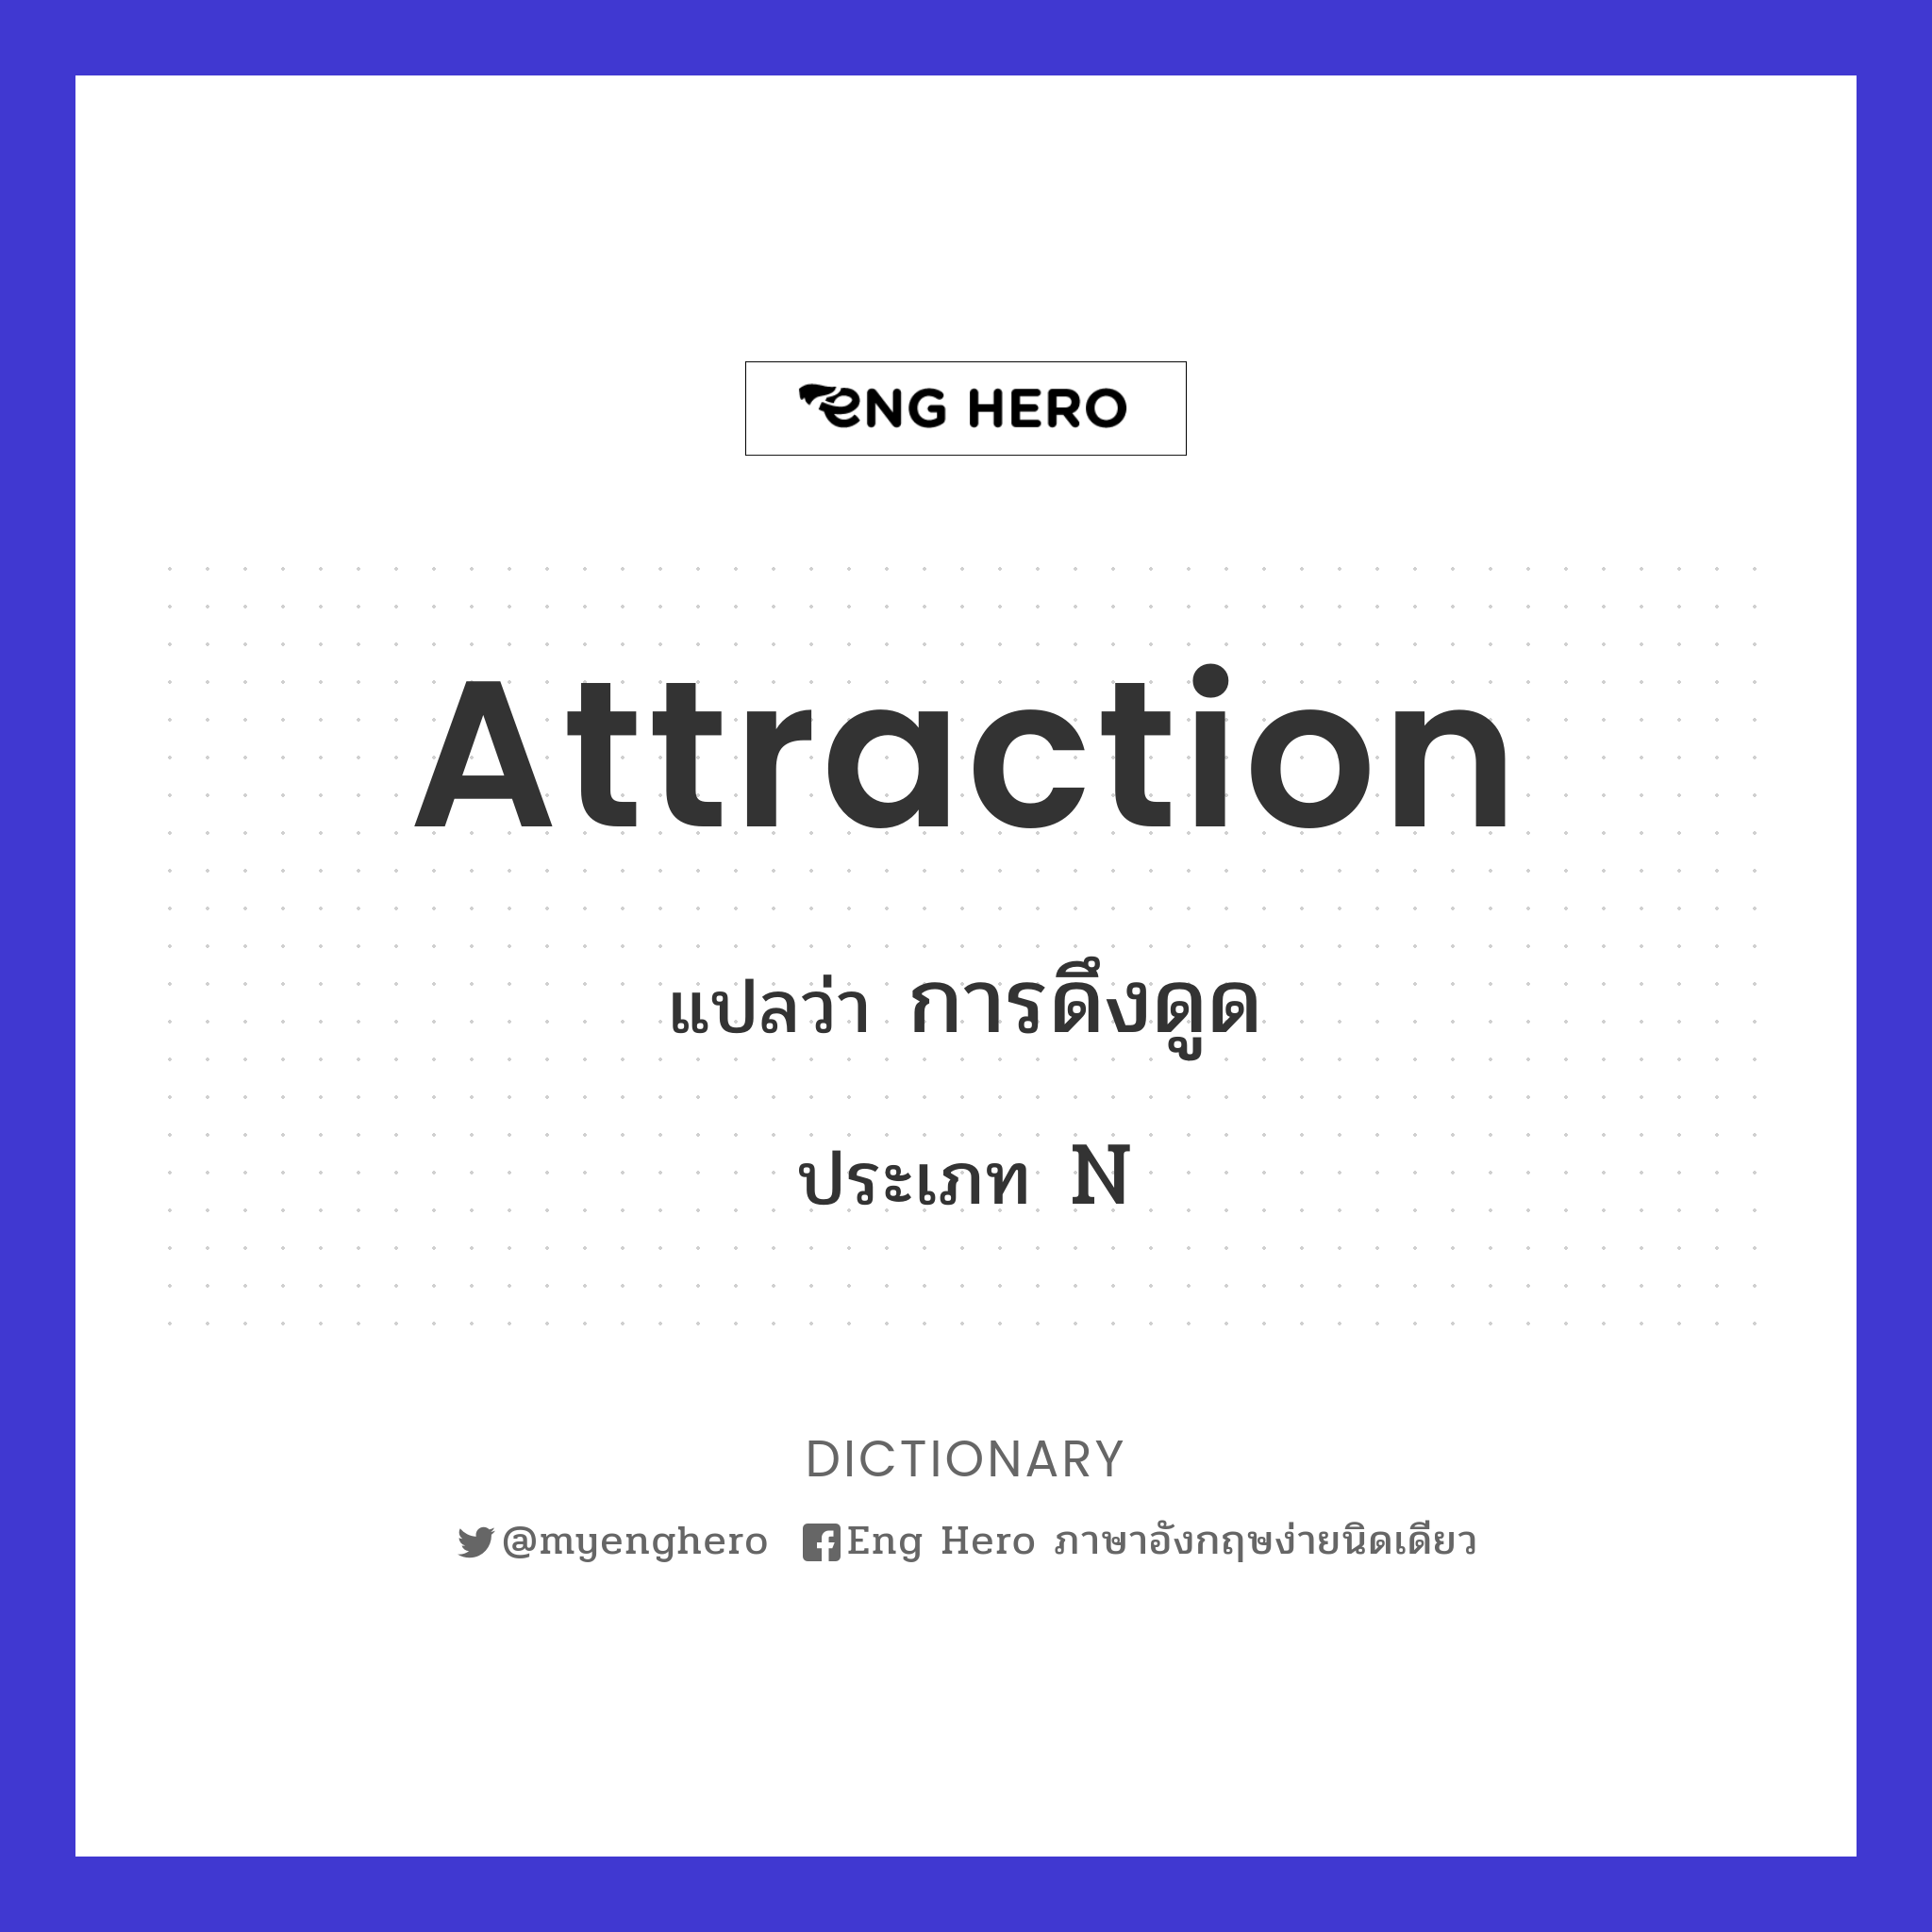 attraction